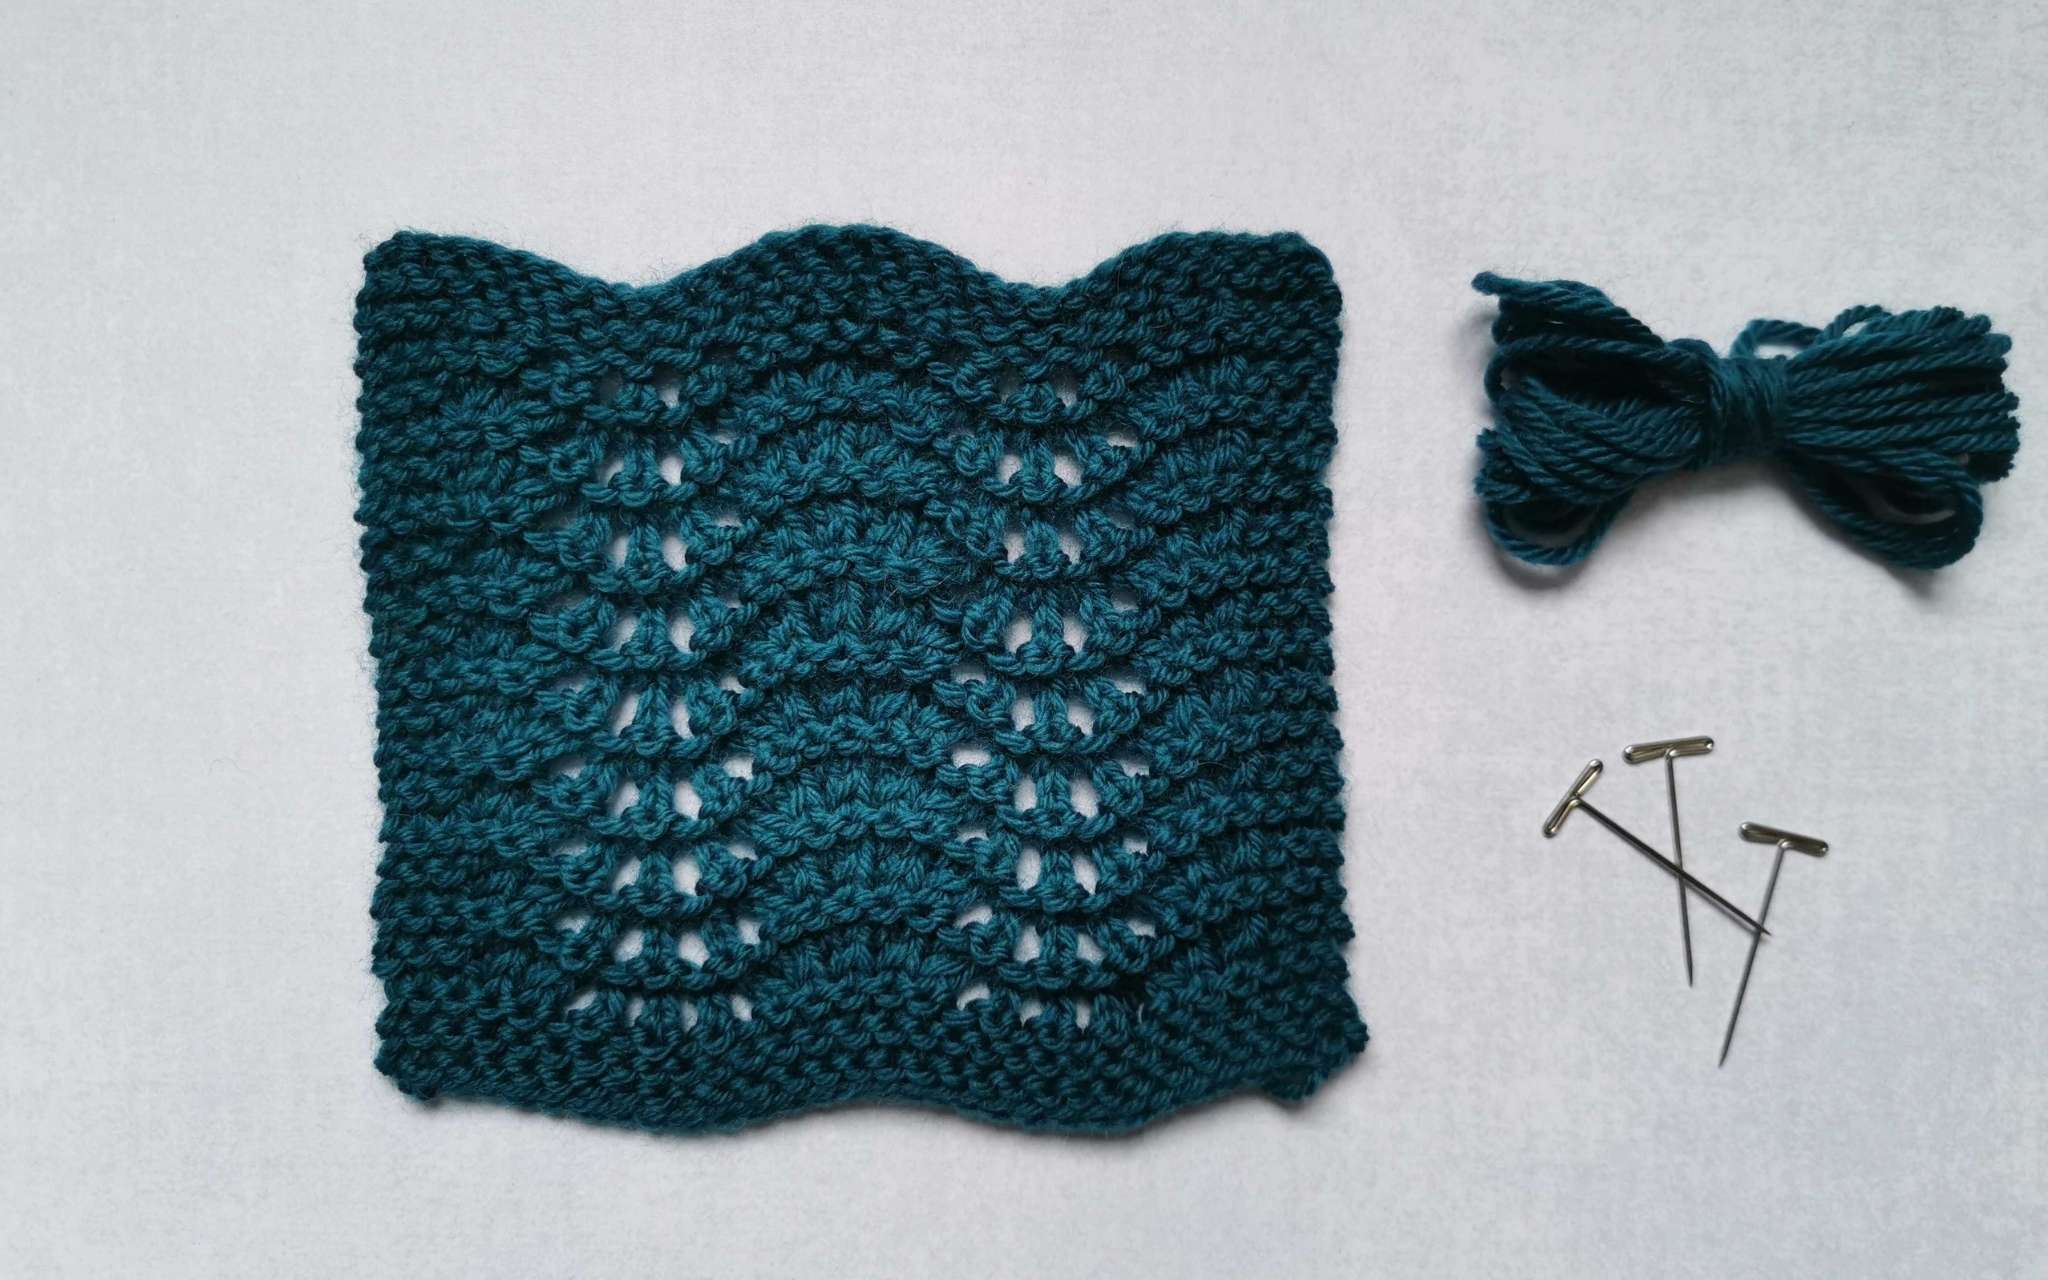 A square swatch of lace in teal, with some bundled up spare yarn and t-pins laying beside it to the right.